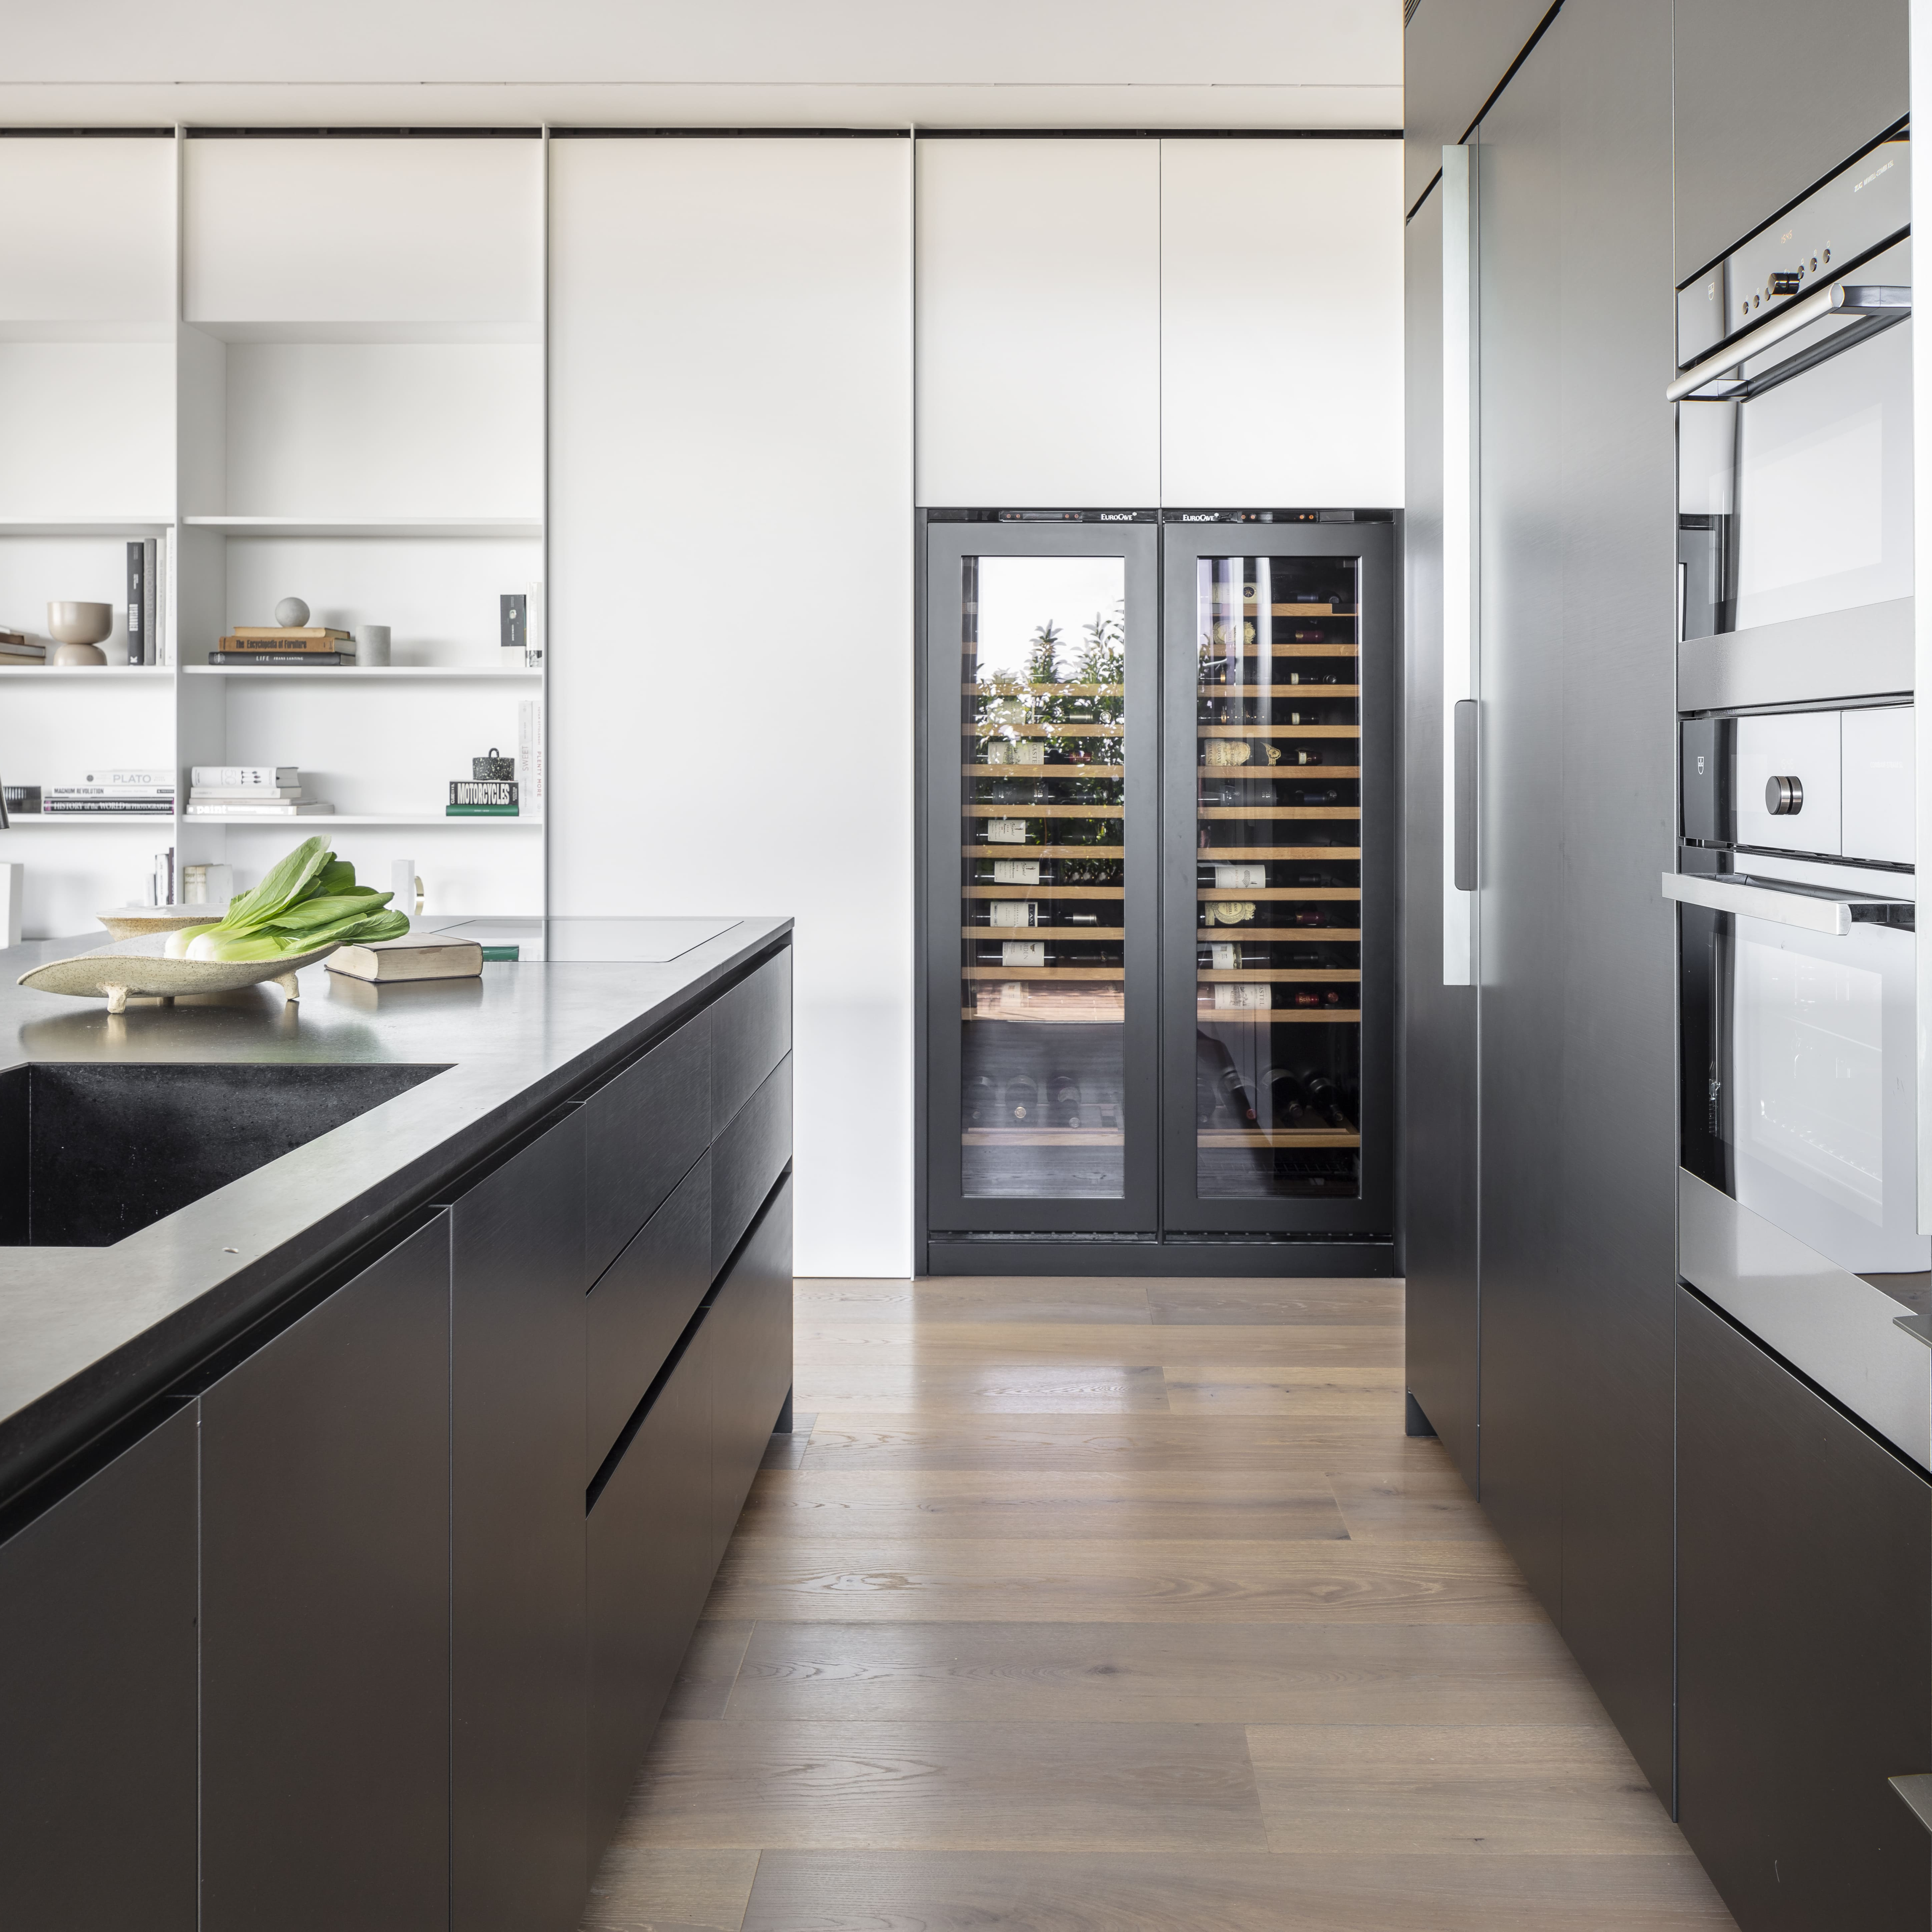 Perfect integration of 2 large wine coolers in this luxury kitchen. The glass technical doors allow you to attach personalized joinery panels to match the furniture.  Inspiration EuroCave